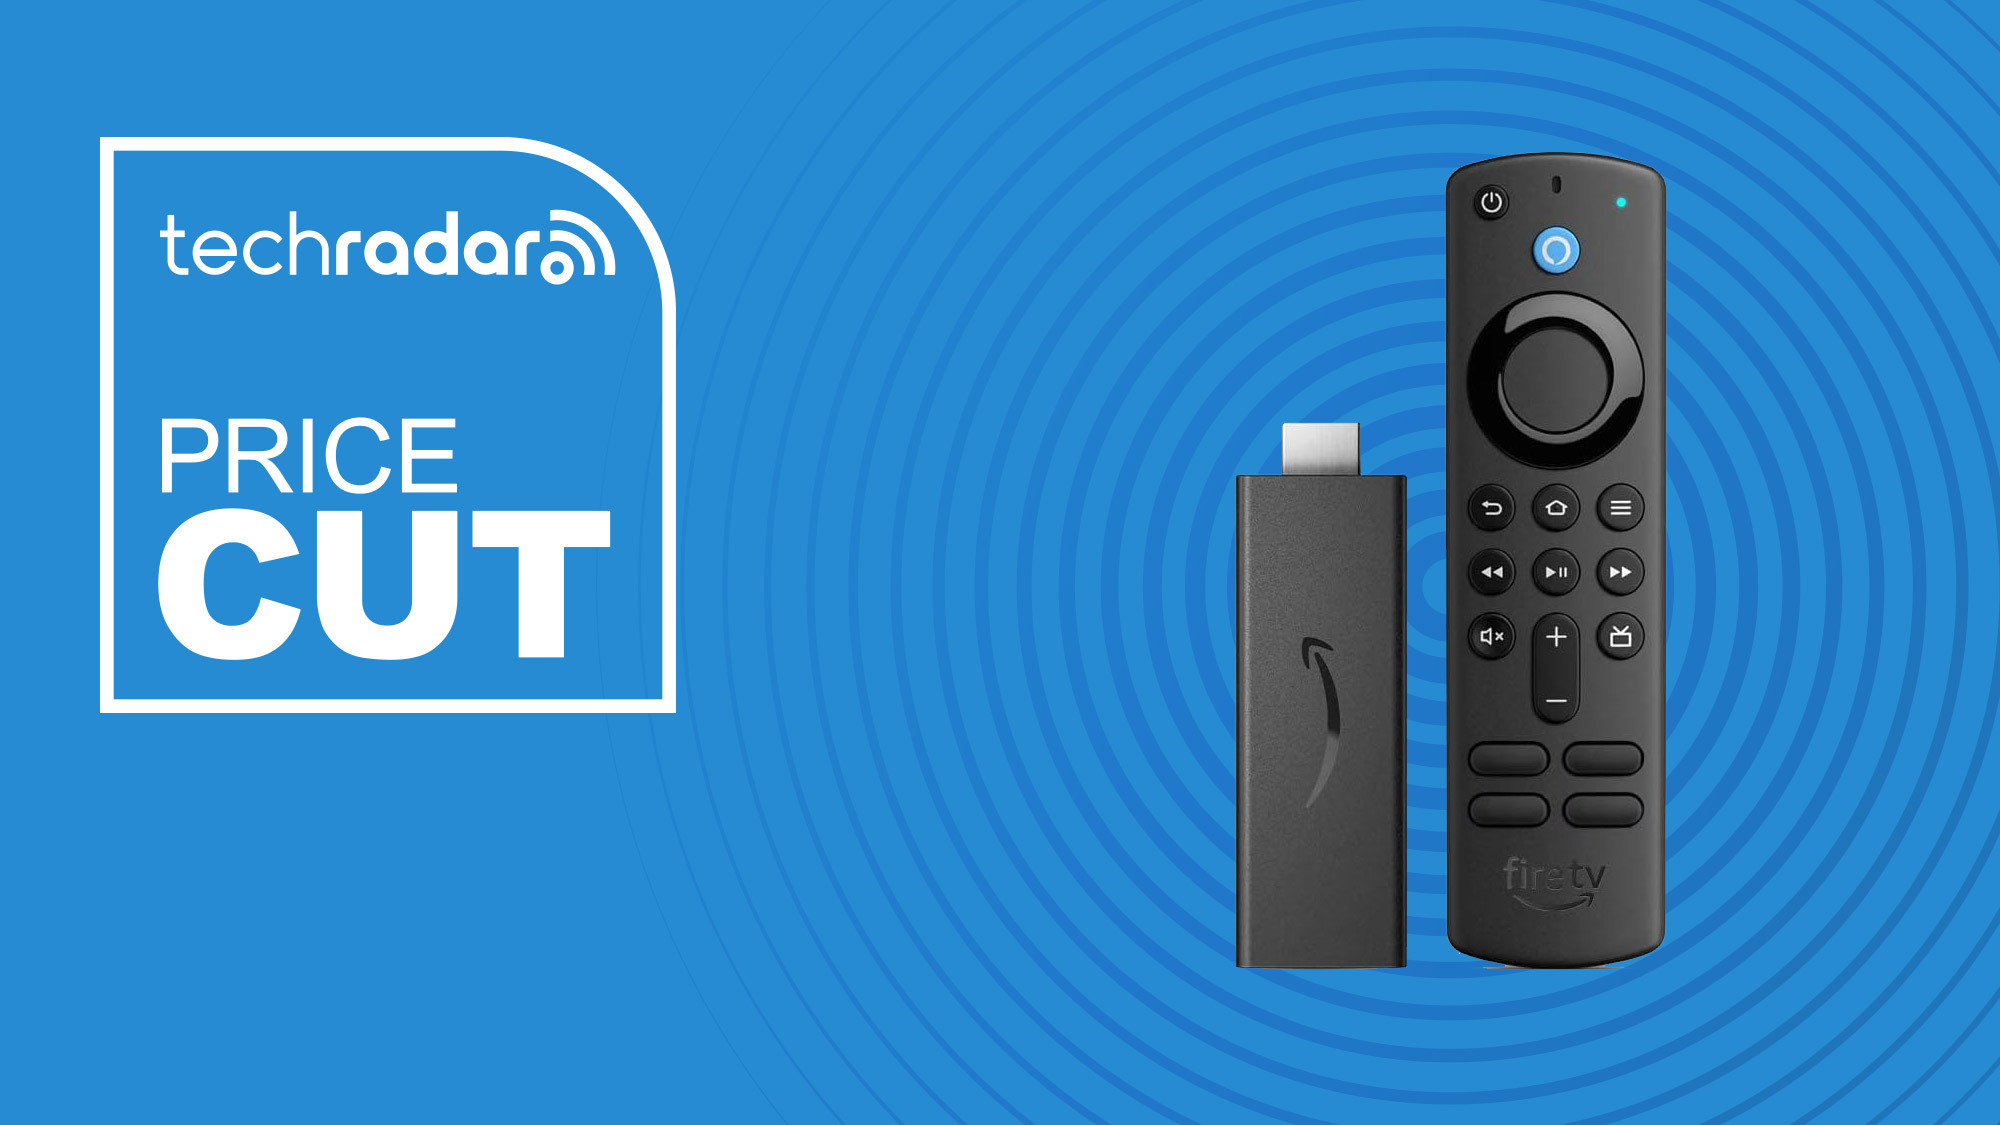 Early Black Friday deal slashes 50% off the Fire TV Stick at